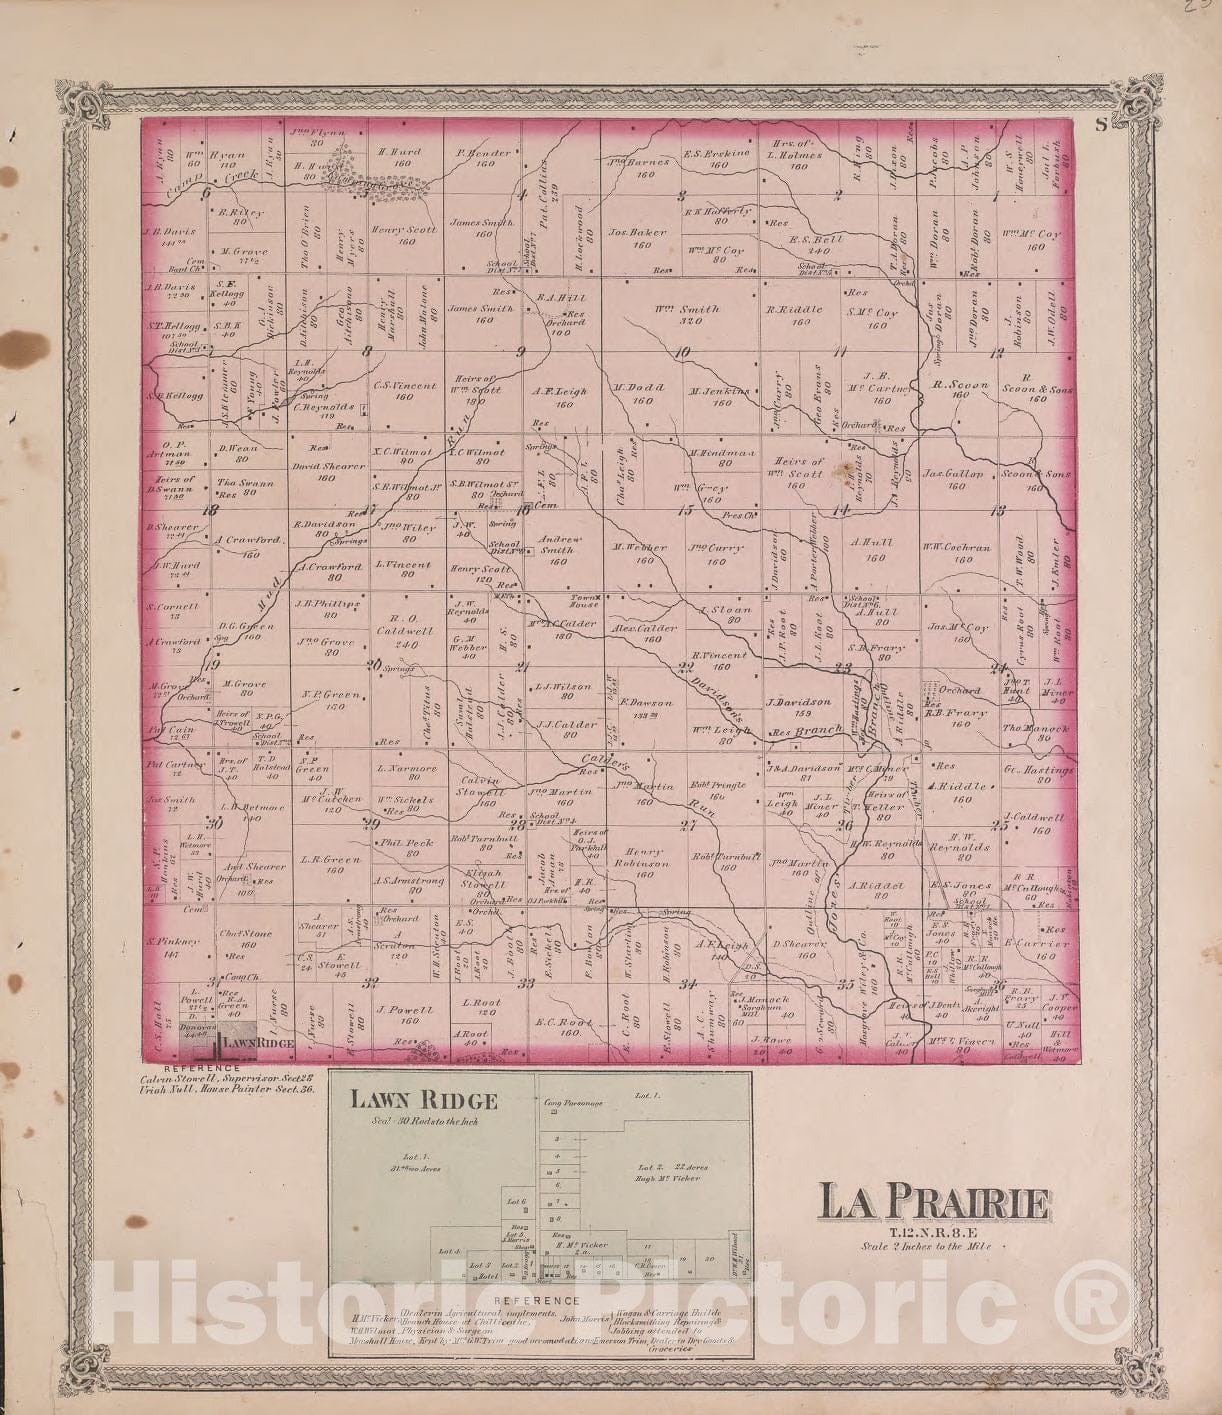 Historic 1870 Map - Atlas of Marshall Co. and The State of Illinois - La Prairie - Atlas of Marshall County and The State of Illinois